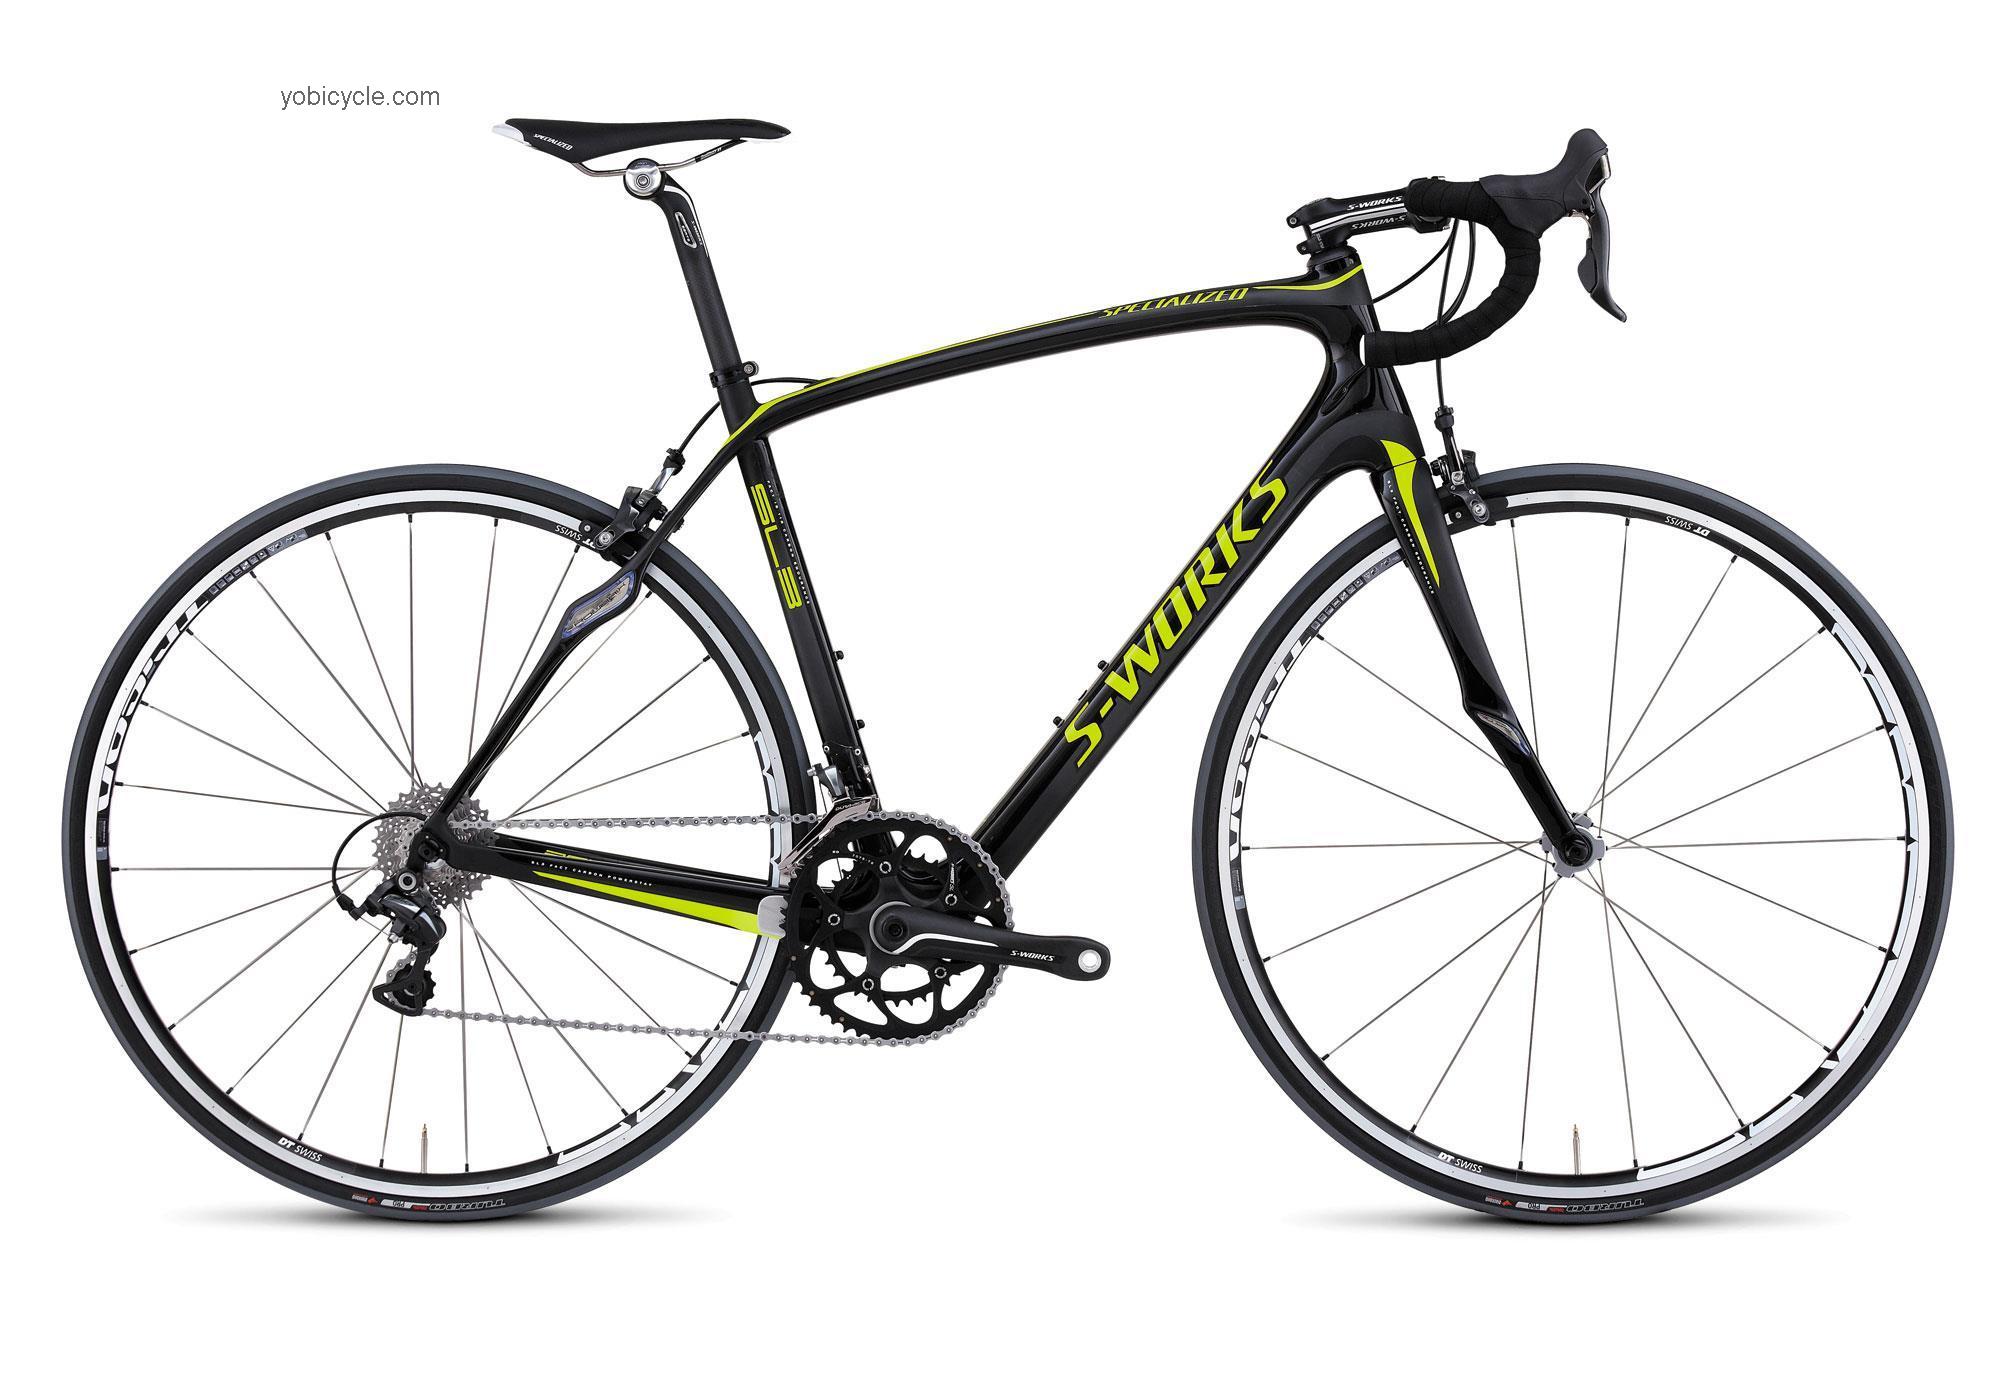 Specialized  S-Works Roubaix SL3 Compact Dura-Ace Technical data and specifications